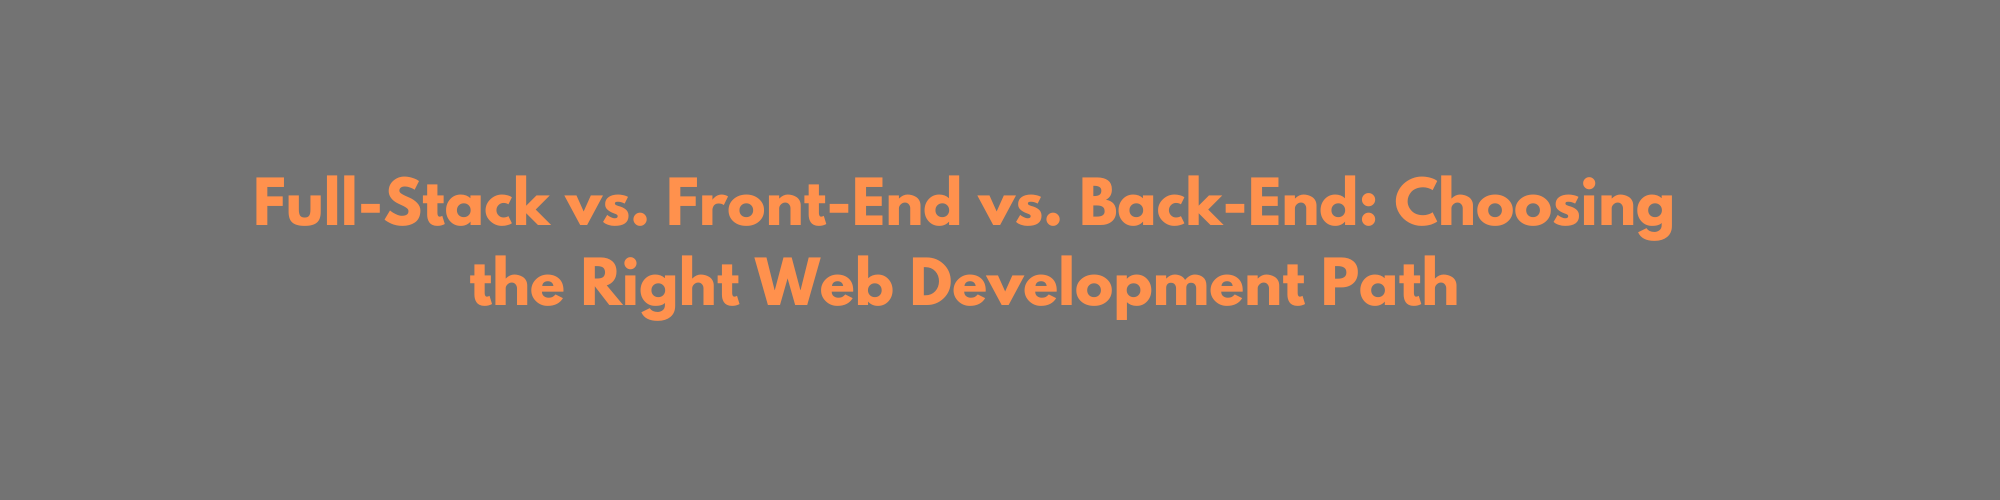 Full-Stack vs. Front-End vs. Back-End: Choosing the Right Web Development Path